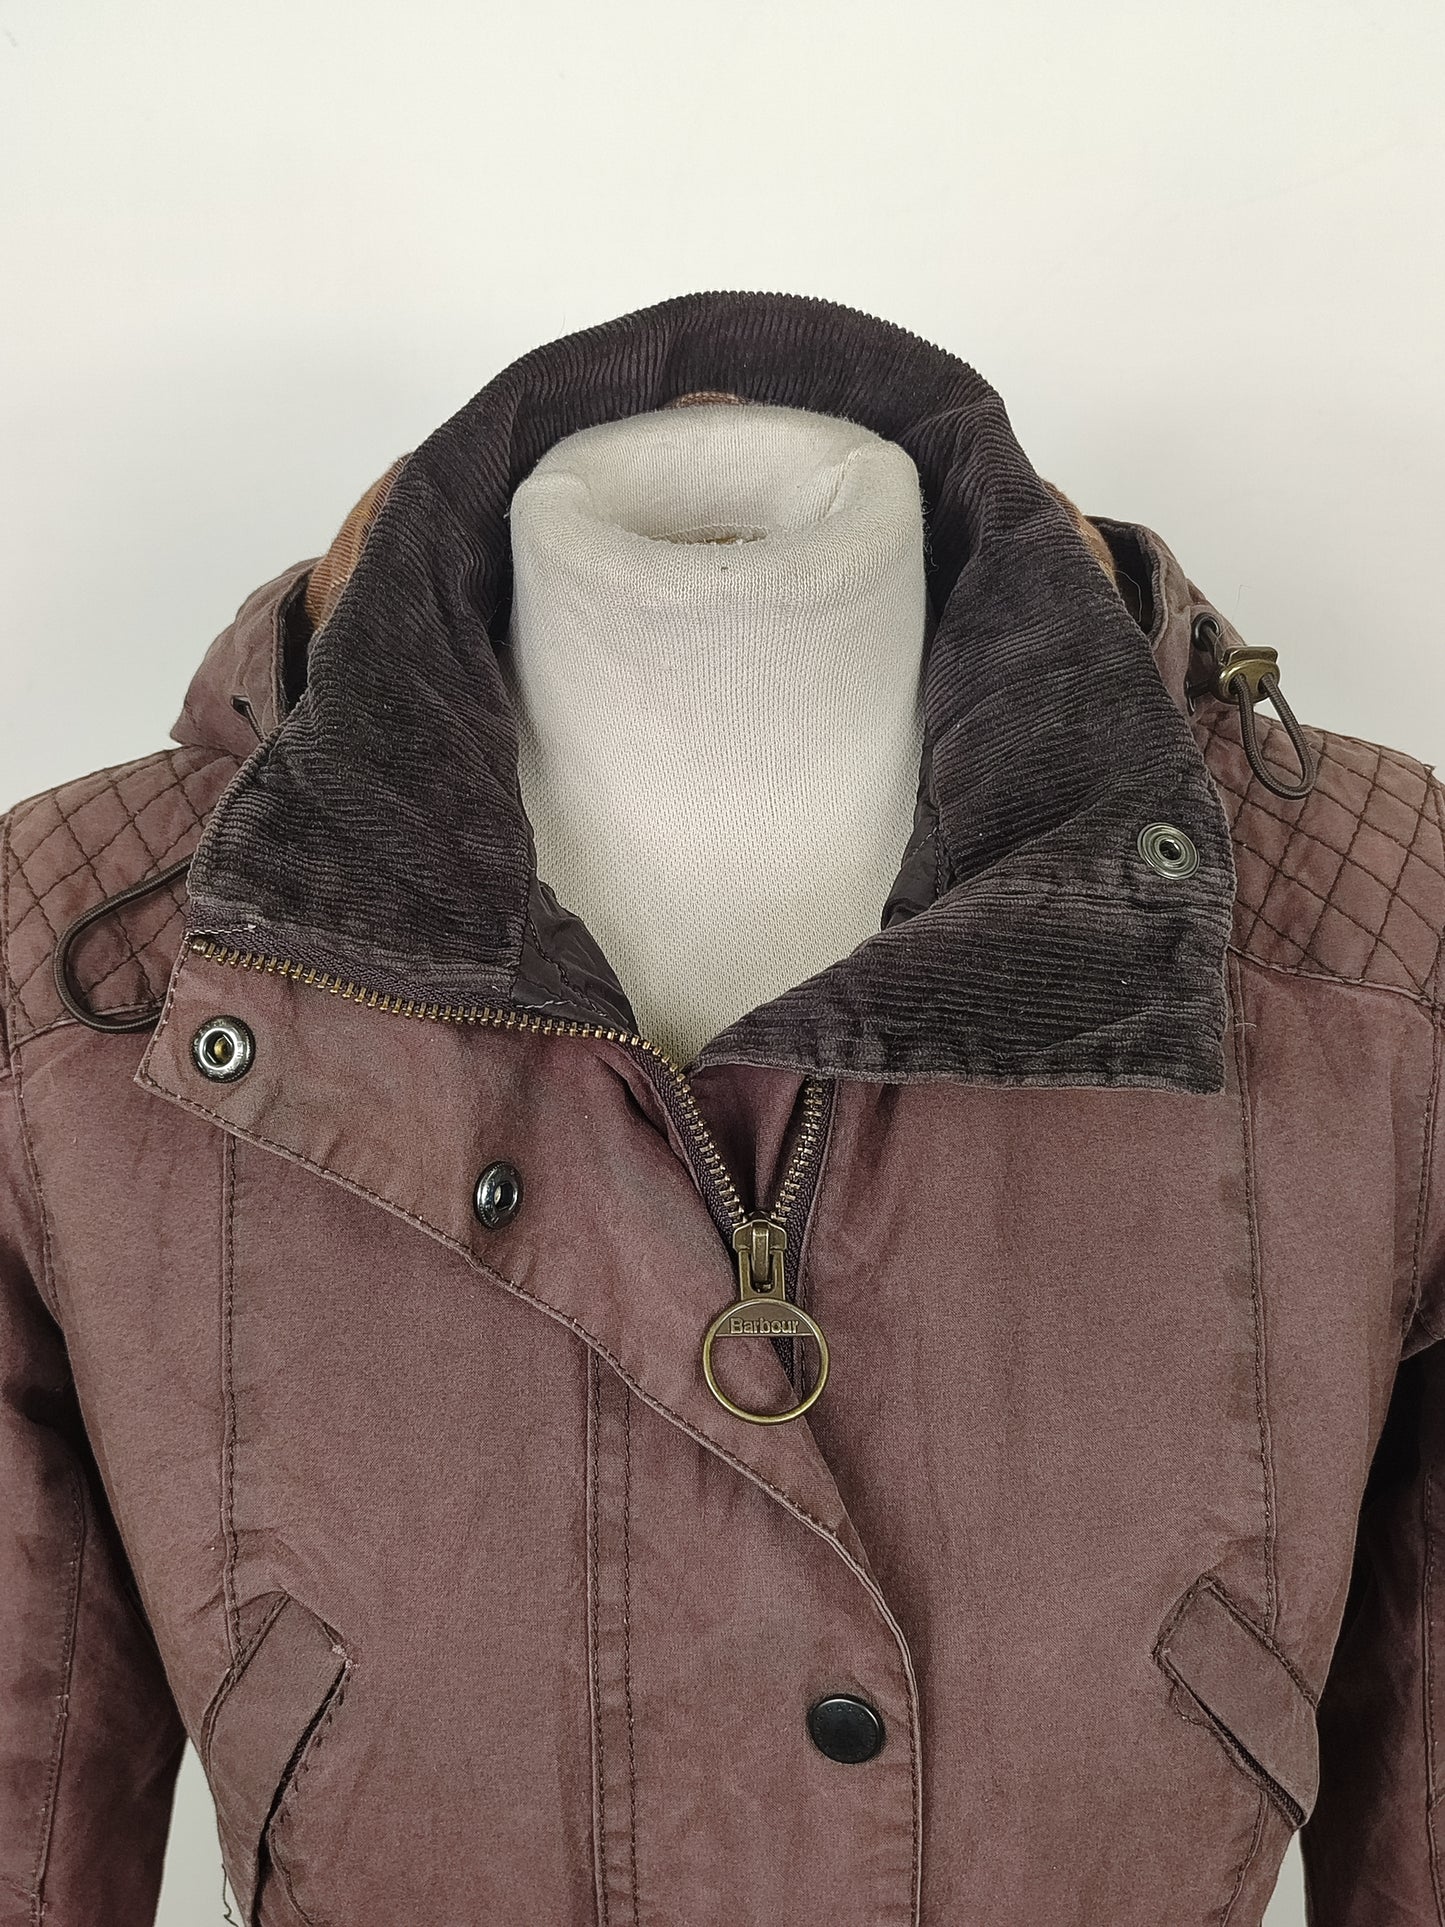 Giacca Barbour donna marrone Rebel UK8 XSmall Brown Lady Wax Rebel jacket XSmall tg.38